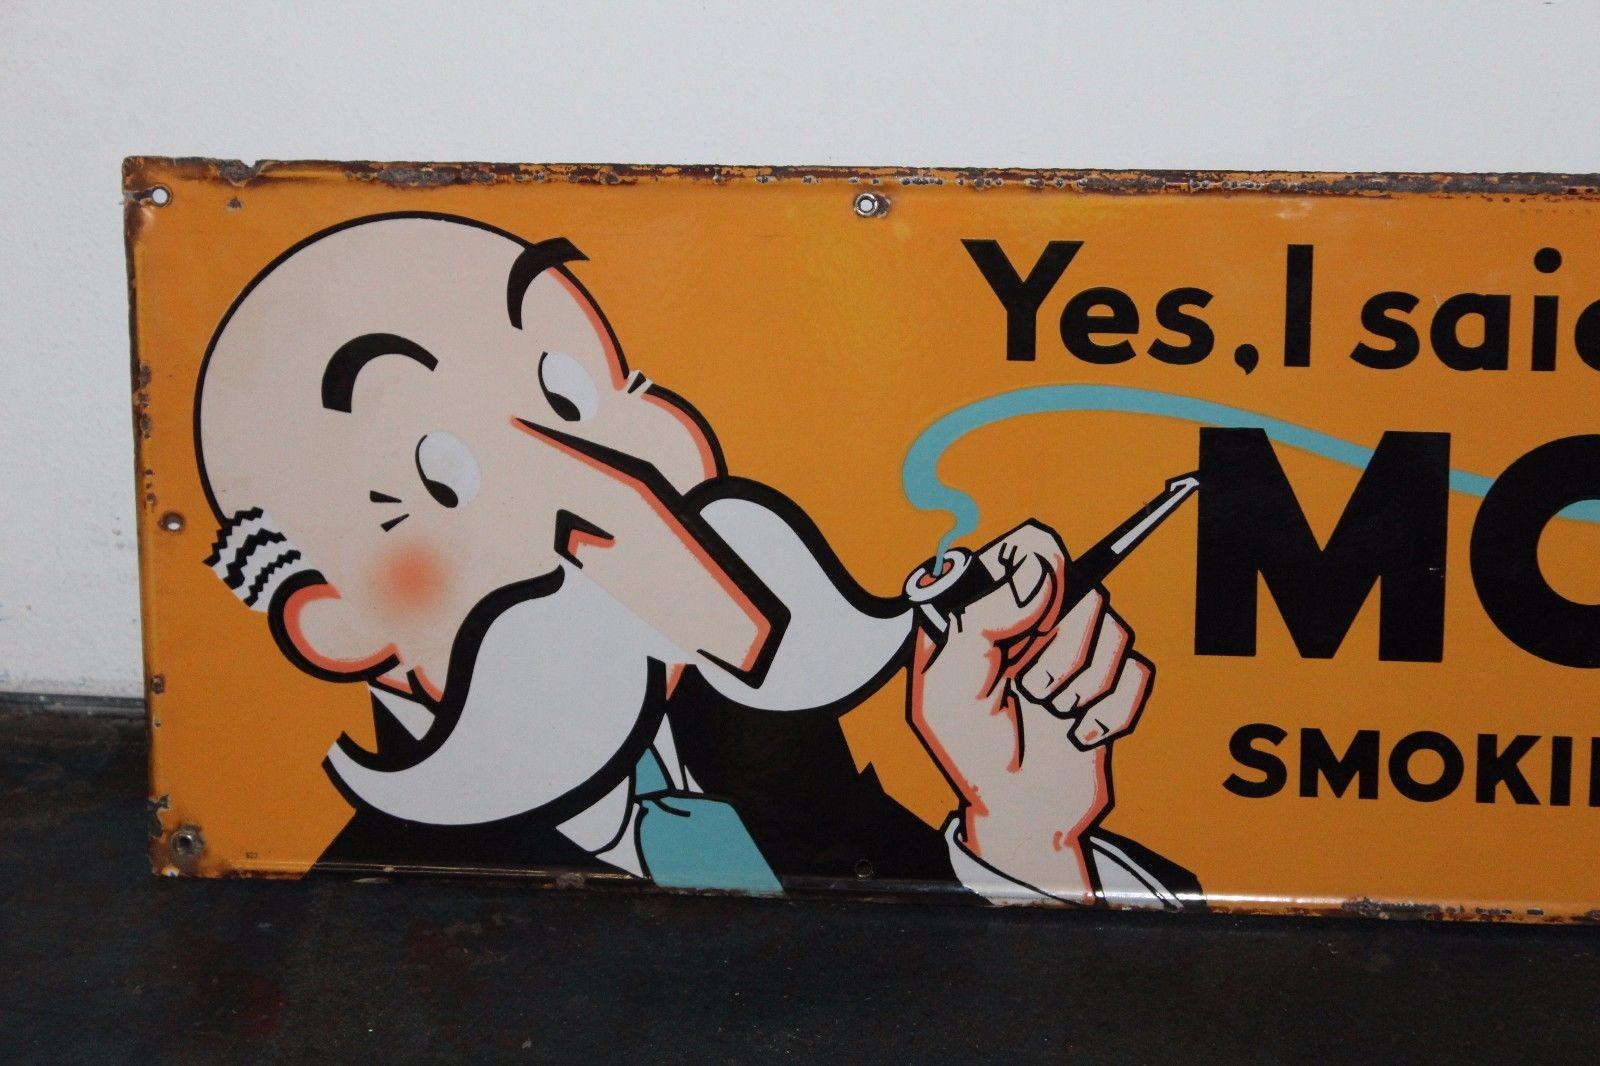 This awesome 1940s porcelain sign was made to advertising Model Tobacco. This tobacco was normally used for pipes during WW11.